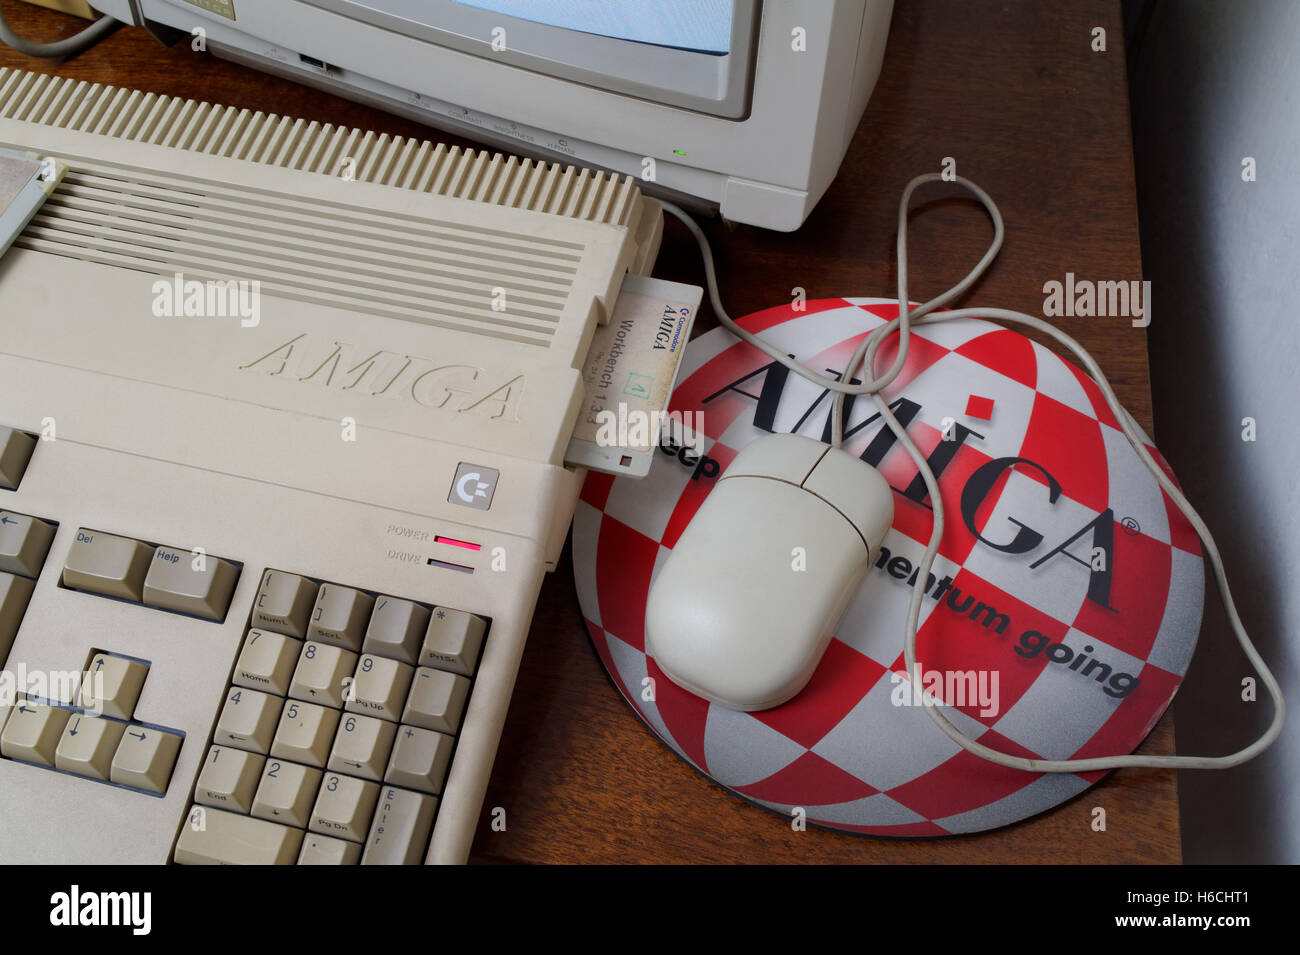 Amiga 500, mouse and mousepad on the table Stock Photo